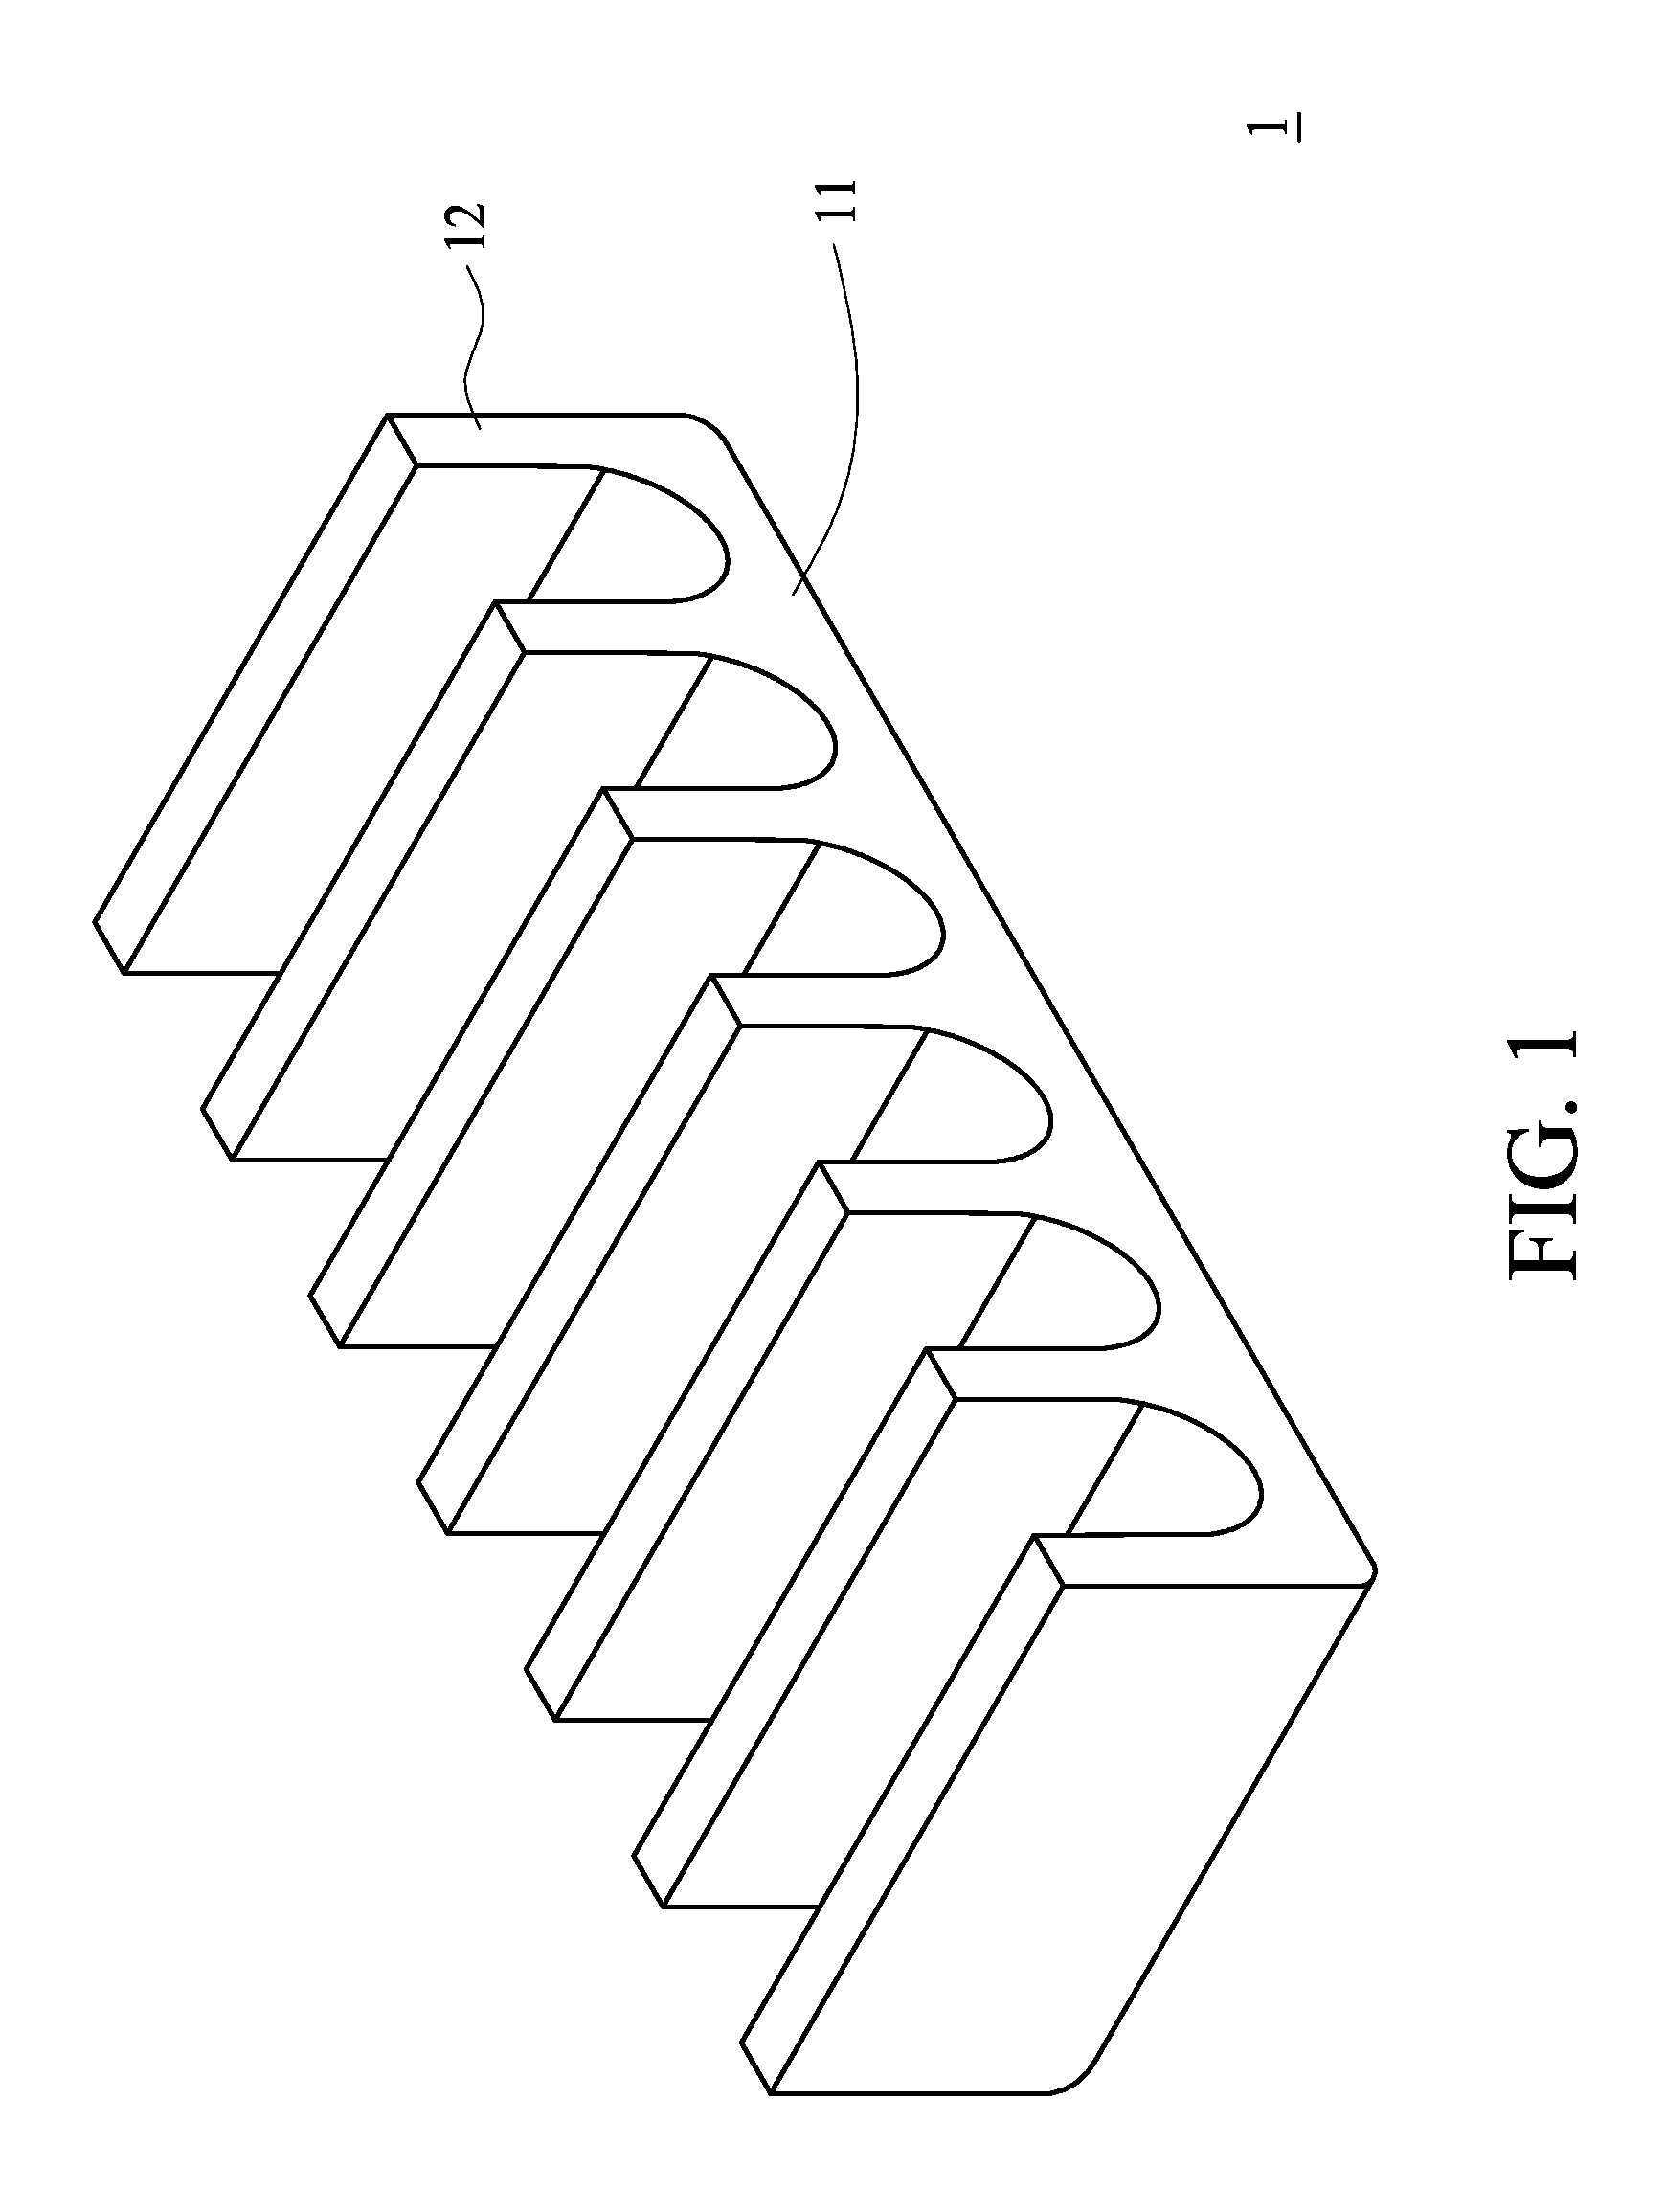 Passive heat sink and light emitting diode lighting device using the same